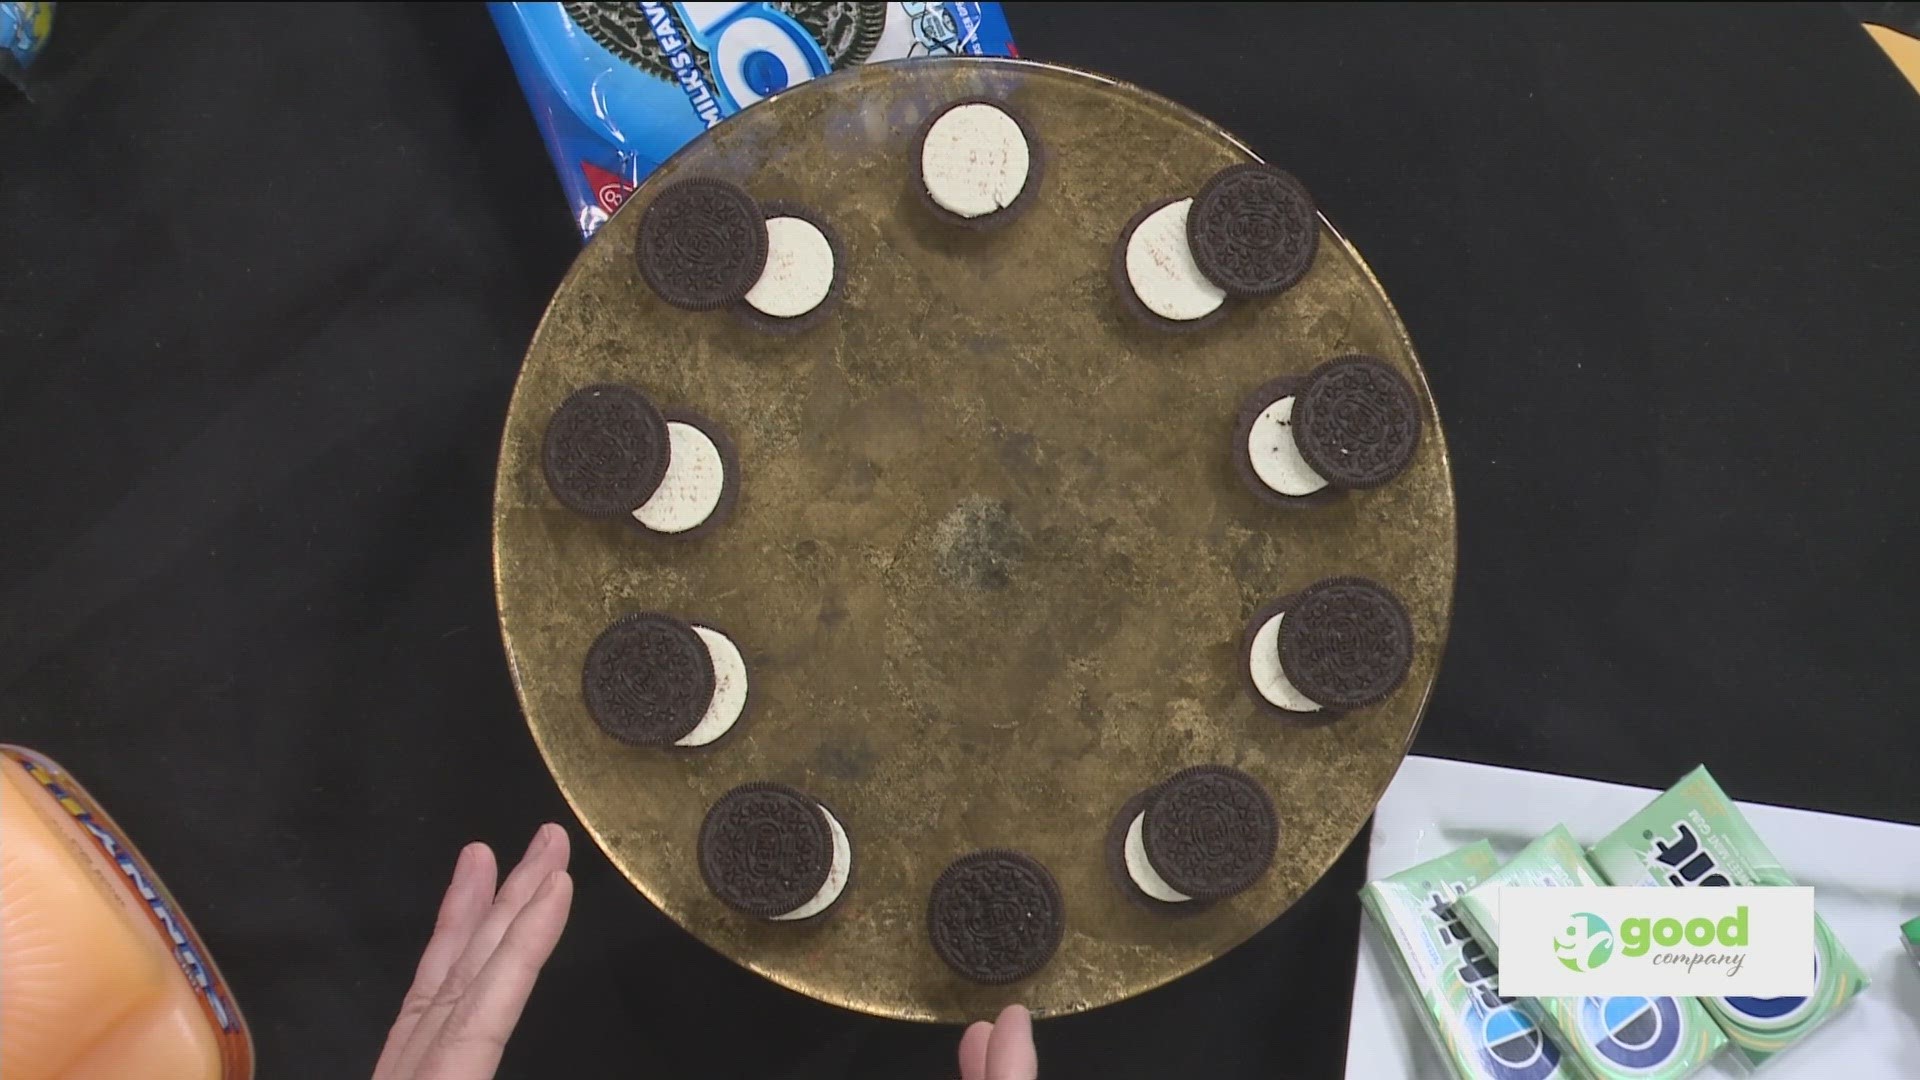 Joe tells us some treats to make the perfect party platter for any eclipse viewing parties!